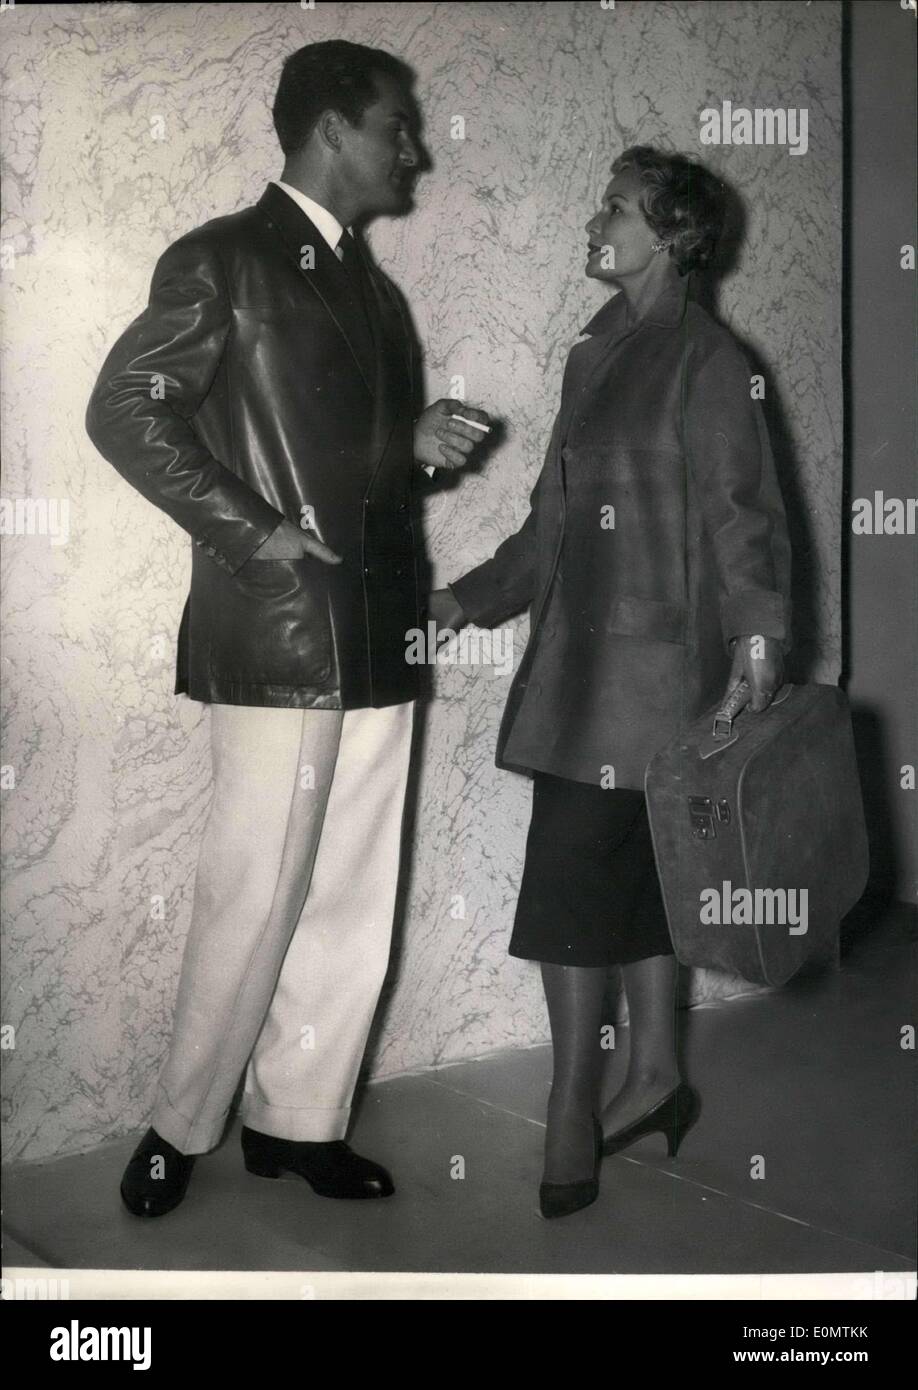 Sep. 08, 1956 - International leather show opens in Paris.: The annual International leather show opened at the Parc des expositions Paris today. Smart leather coats featured at the show. Stock Photo